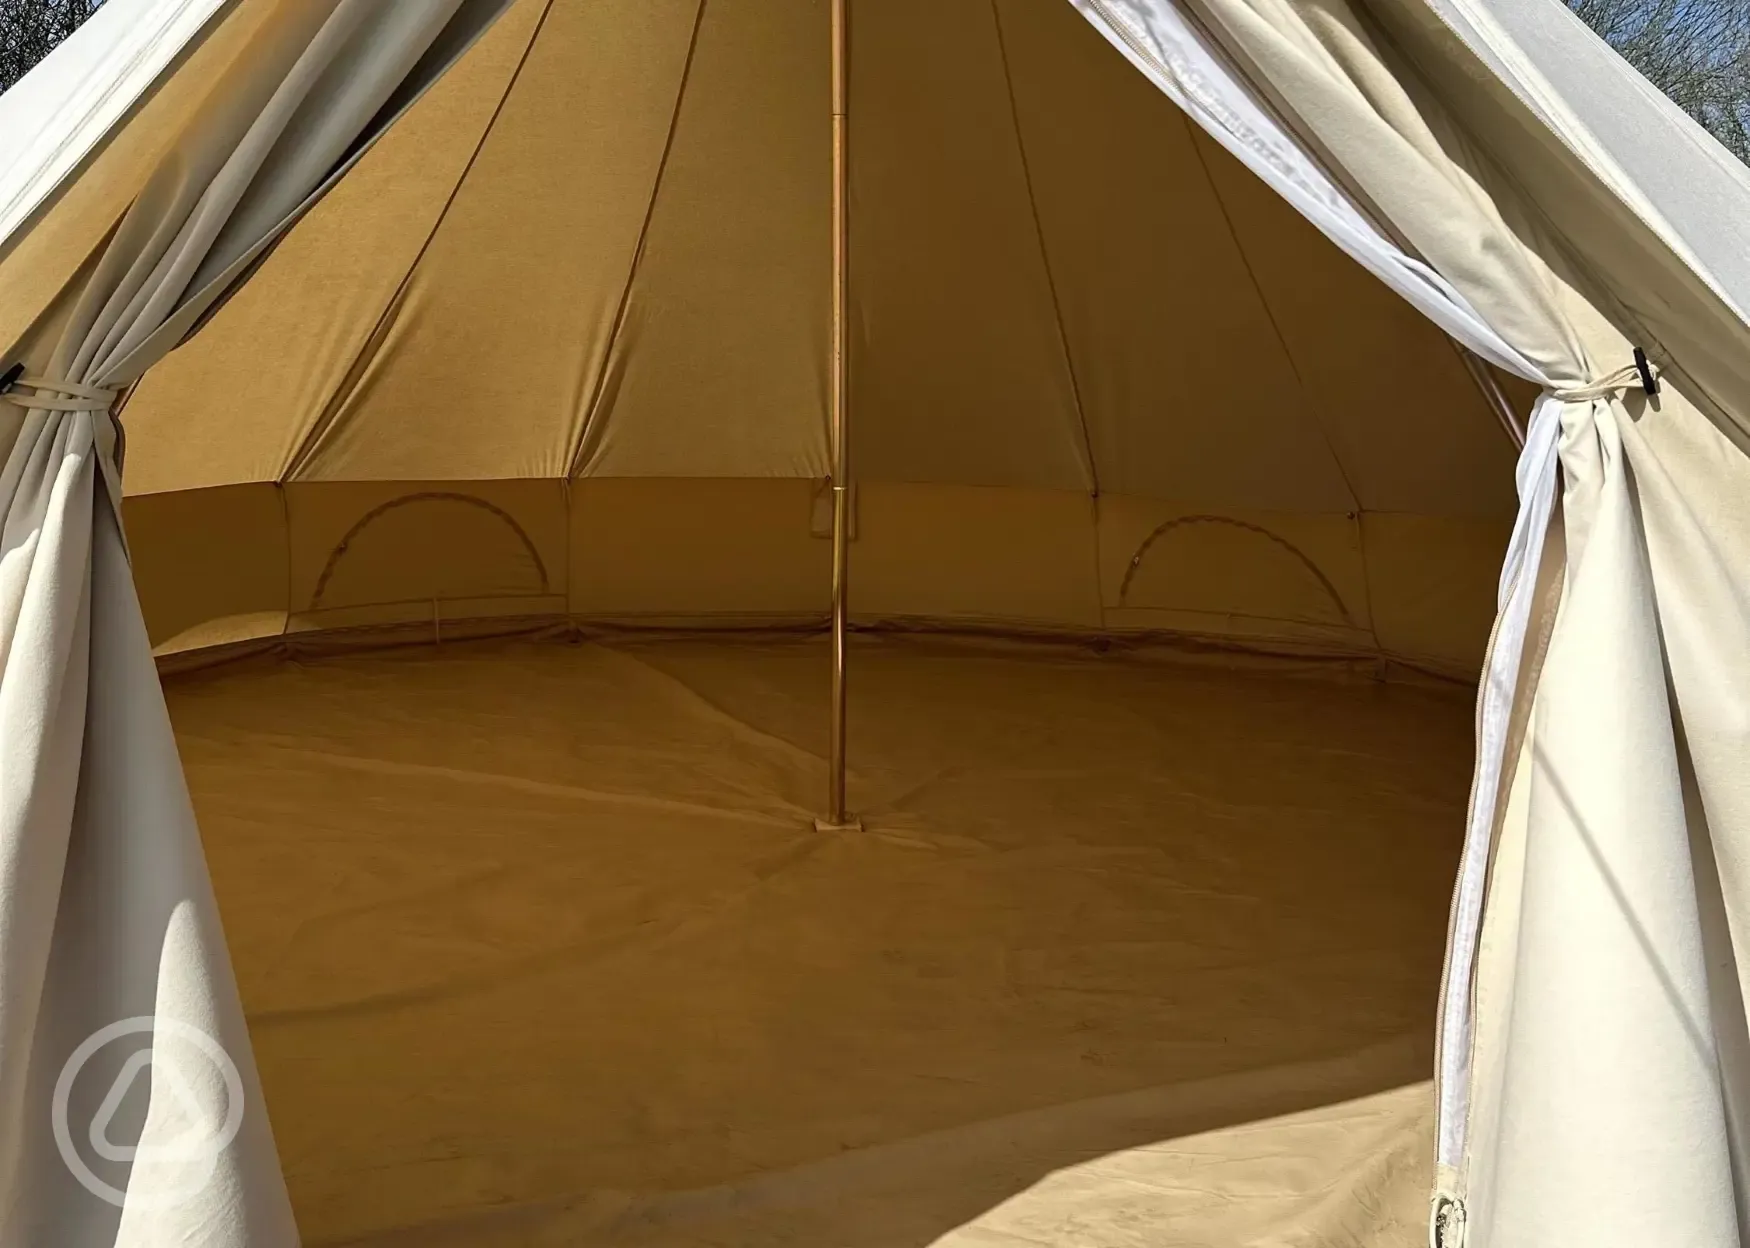 Unfurnished bell tent interior